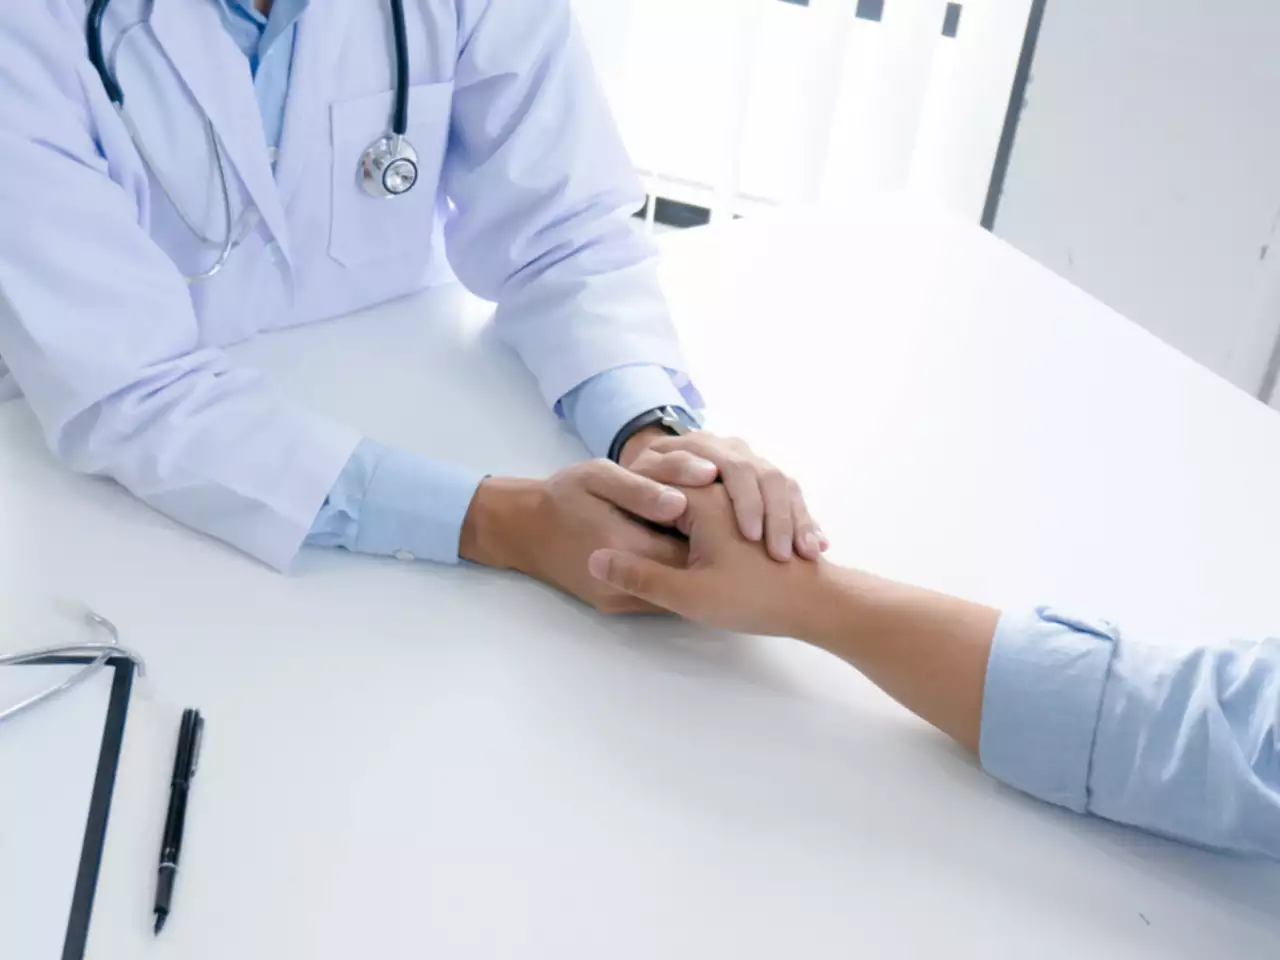 The Importance of Building Trust in the Doctor-Patient Relationship